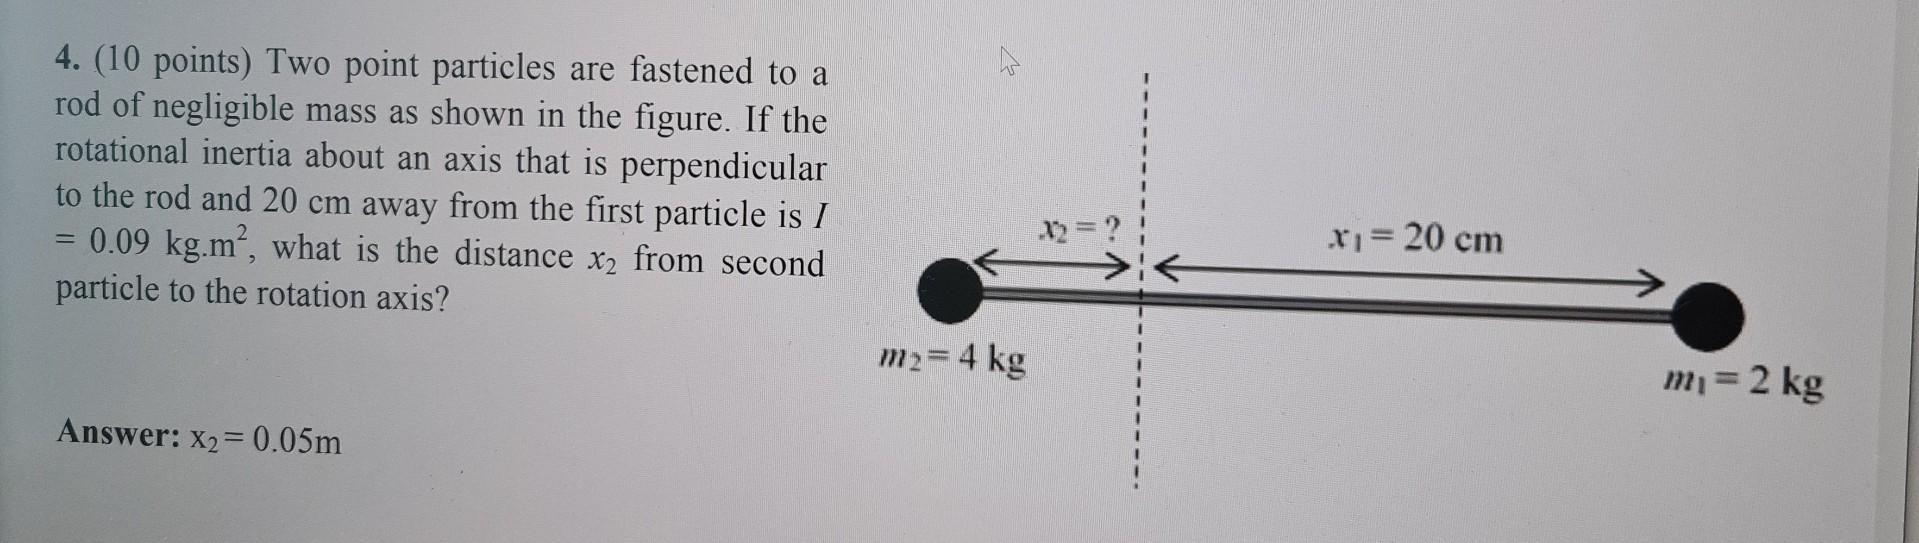 4. (10 points) Two point particles are fastened to a rod of negligible mass as shown in the figure. If the rotational inertia